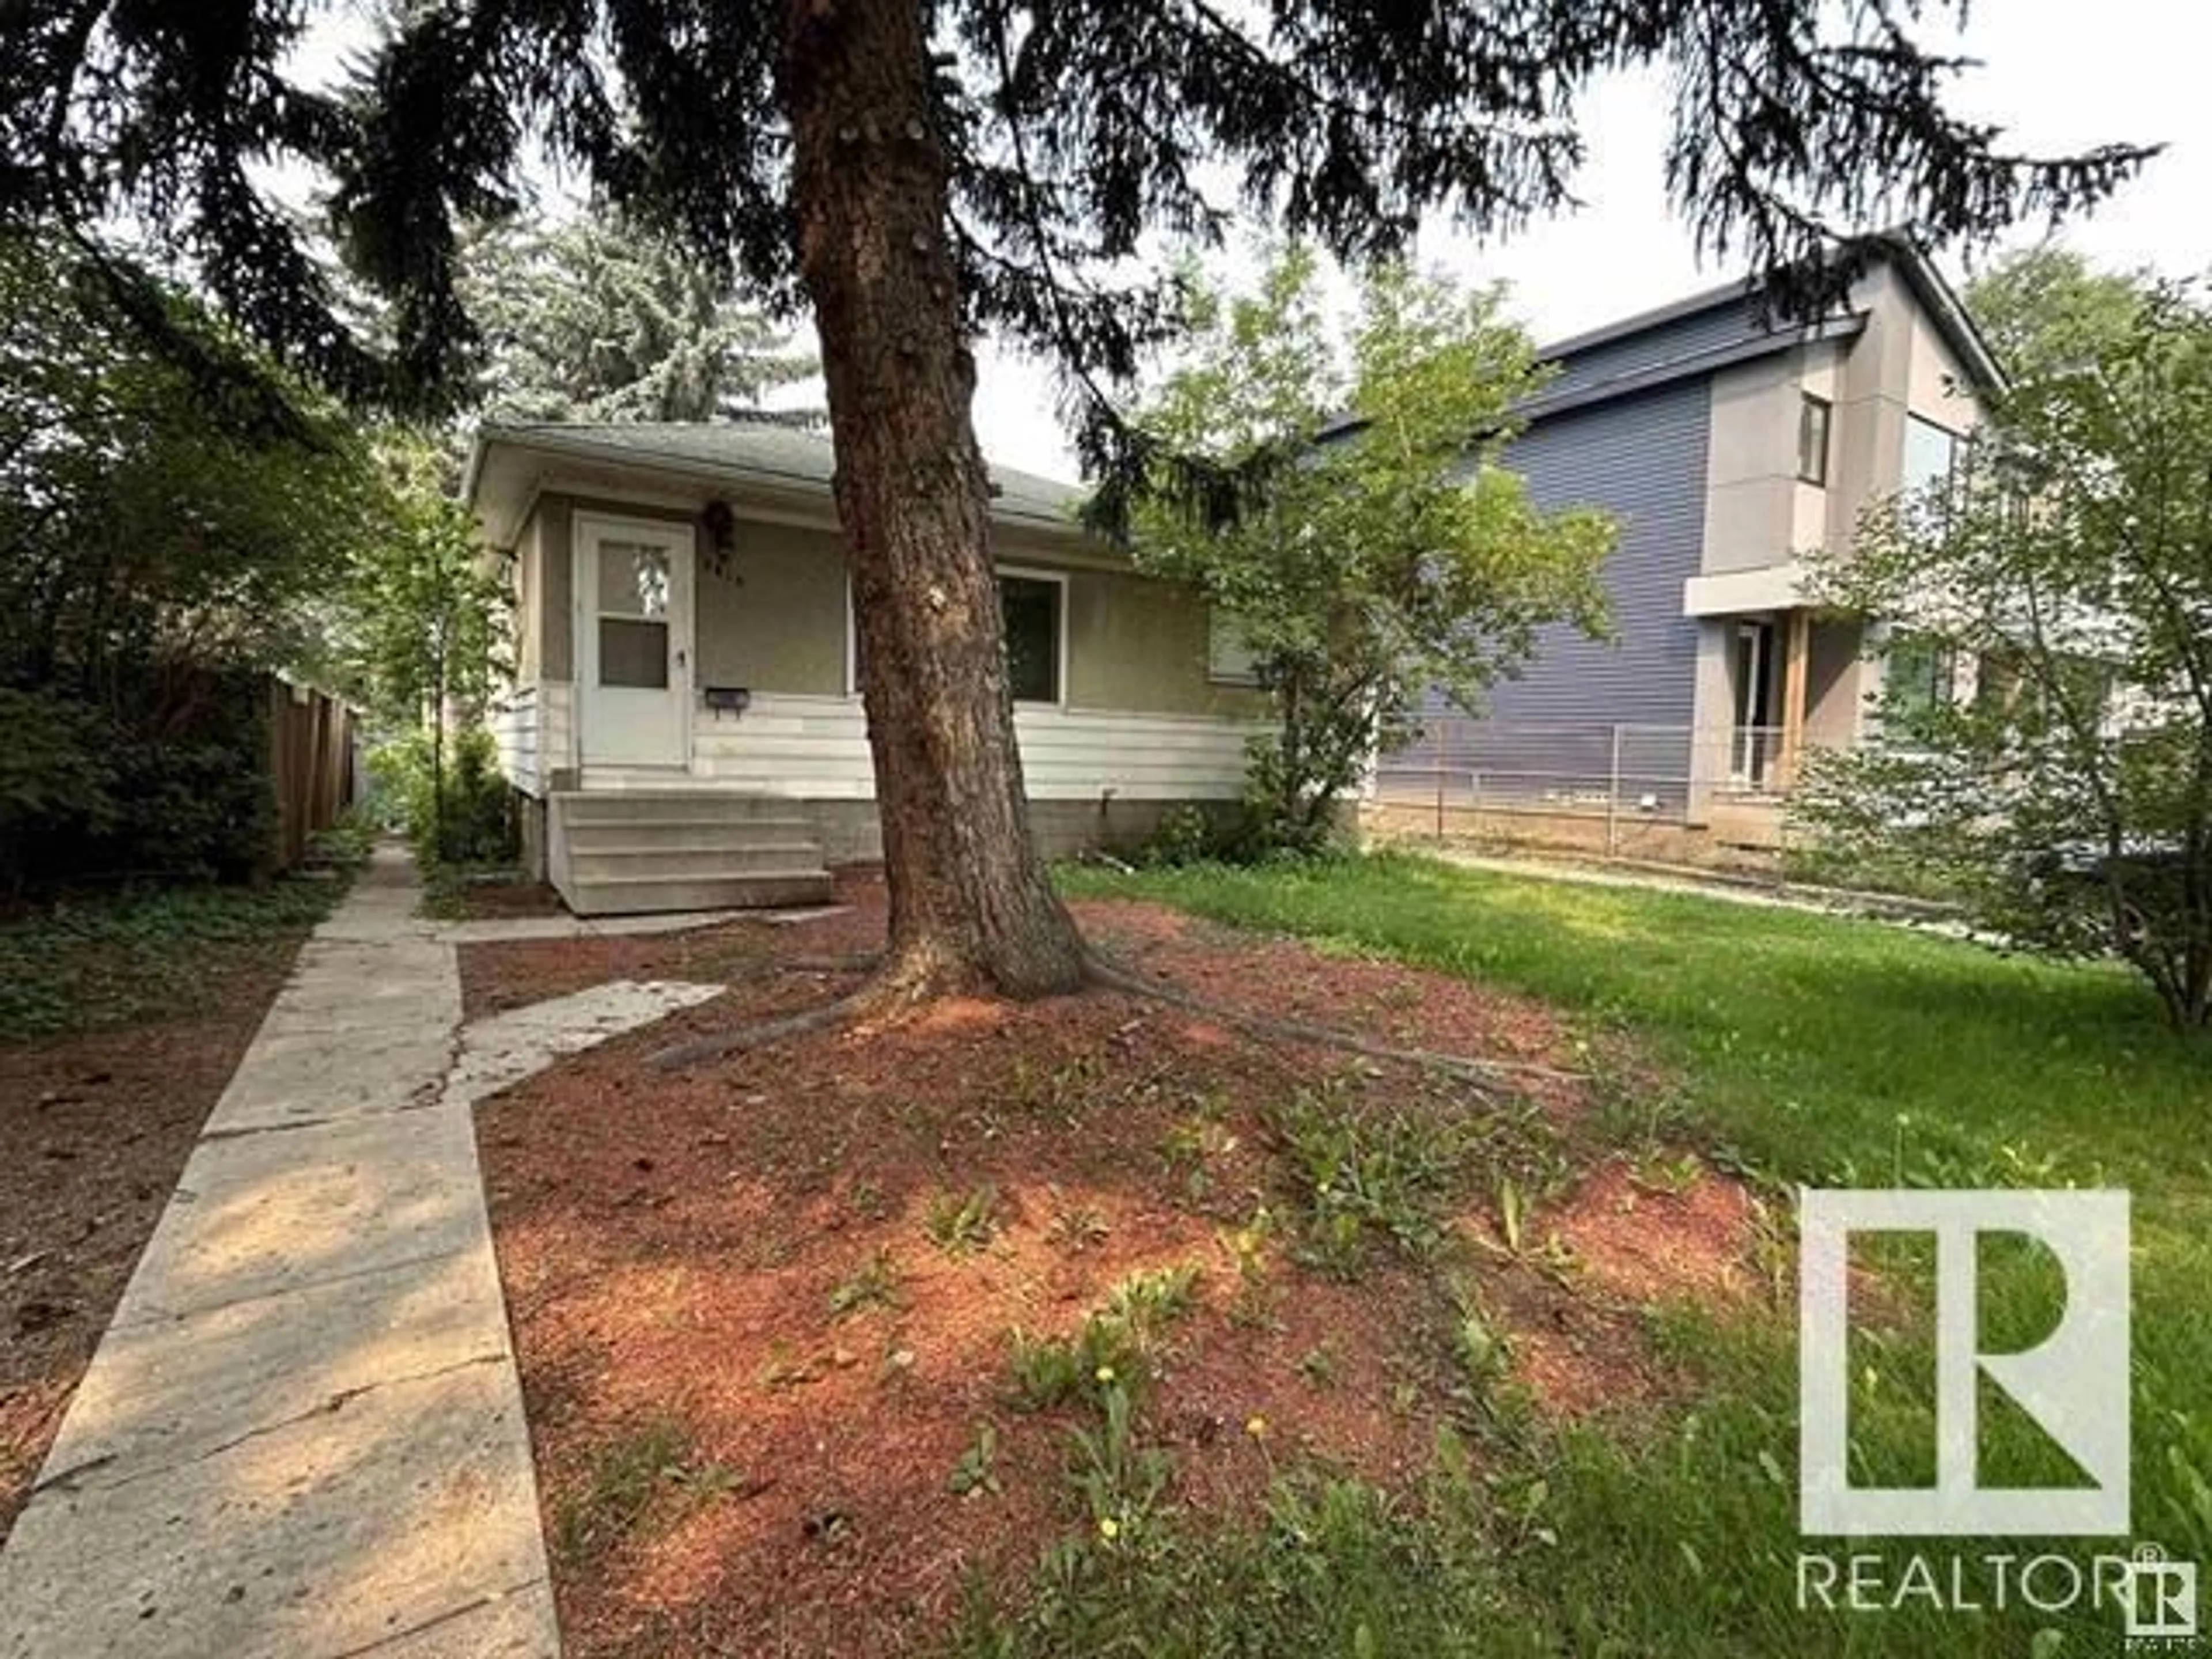 Frontside or backside of a home for 8816 79 ST NW, Edmonton Alberta T6C2P6